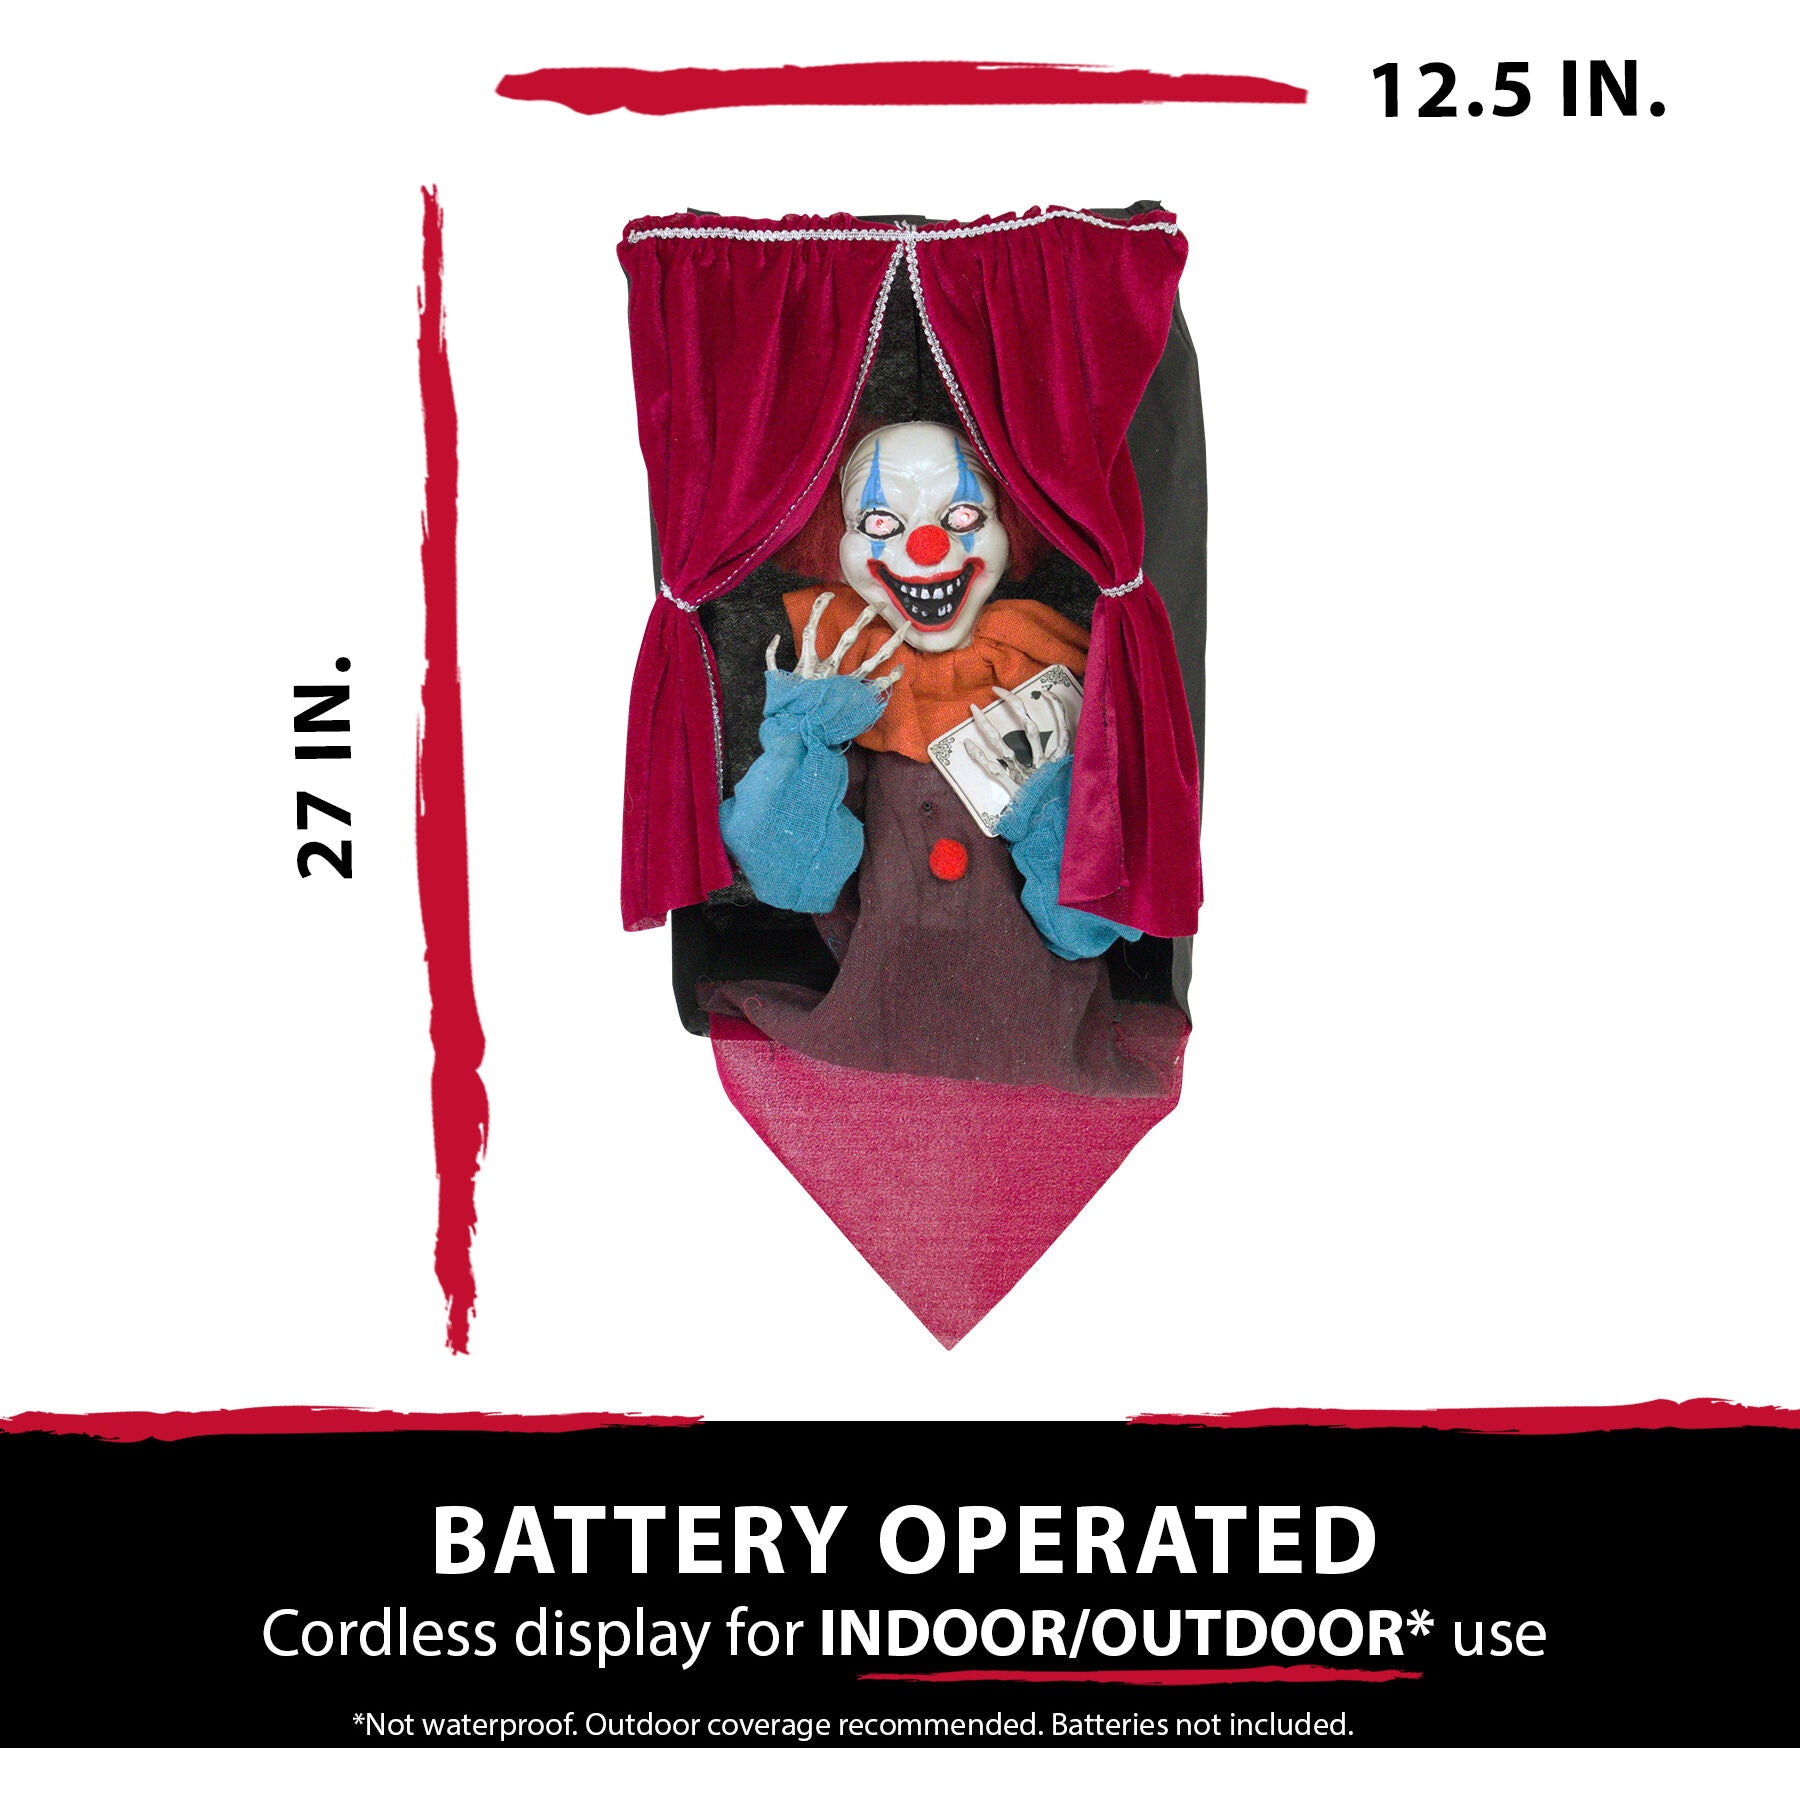 Haunted Hill Farm -  Ace the Talking Clown, Hanging Halloween Decoration, Indoor or Covered Outdoor Display, Red LED Eyes